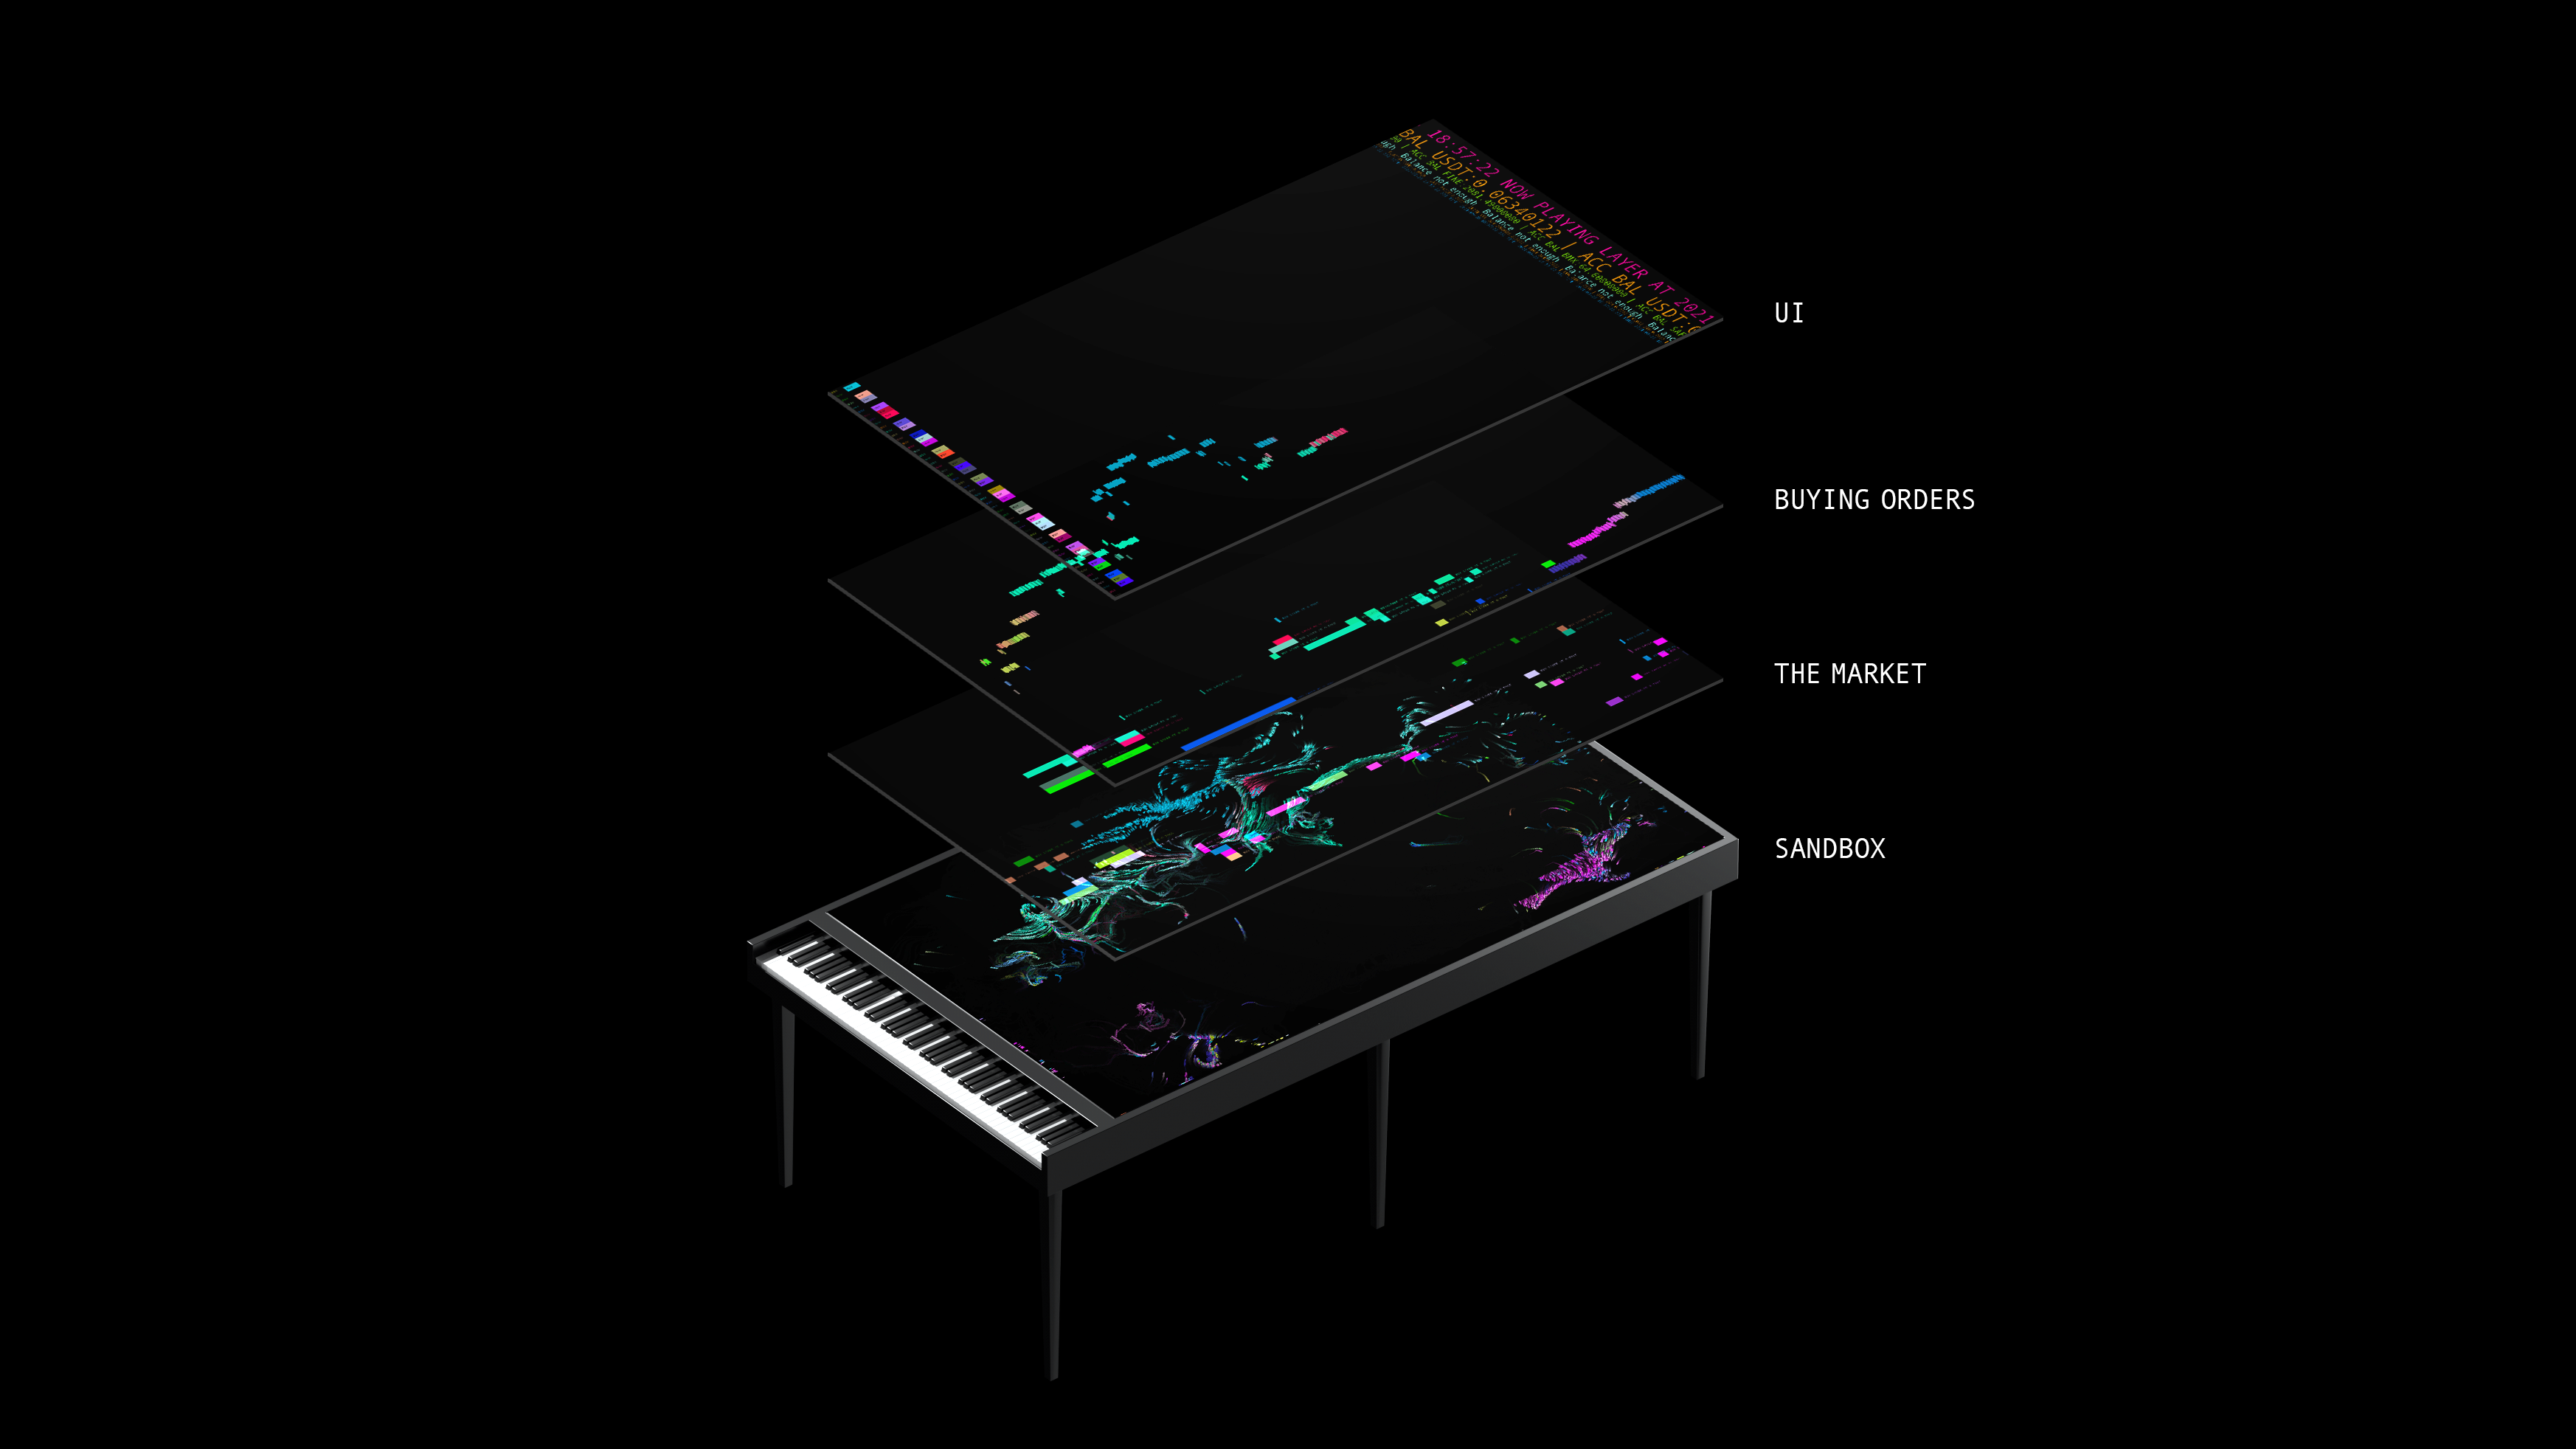 Exploded diagram of piano with list 1. UI 2. Buying orders 3. The market 4. Sandbox